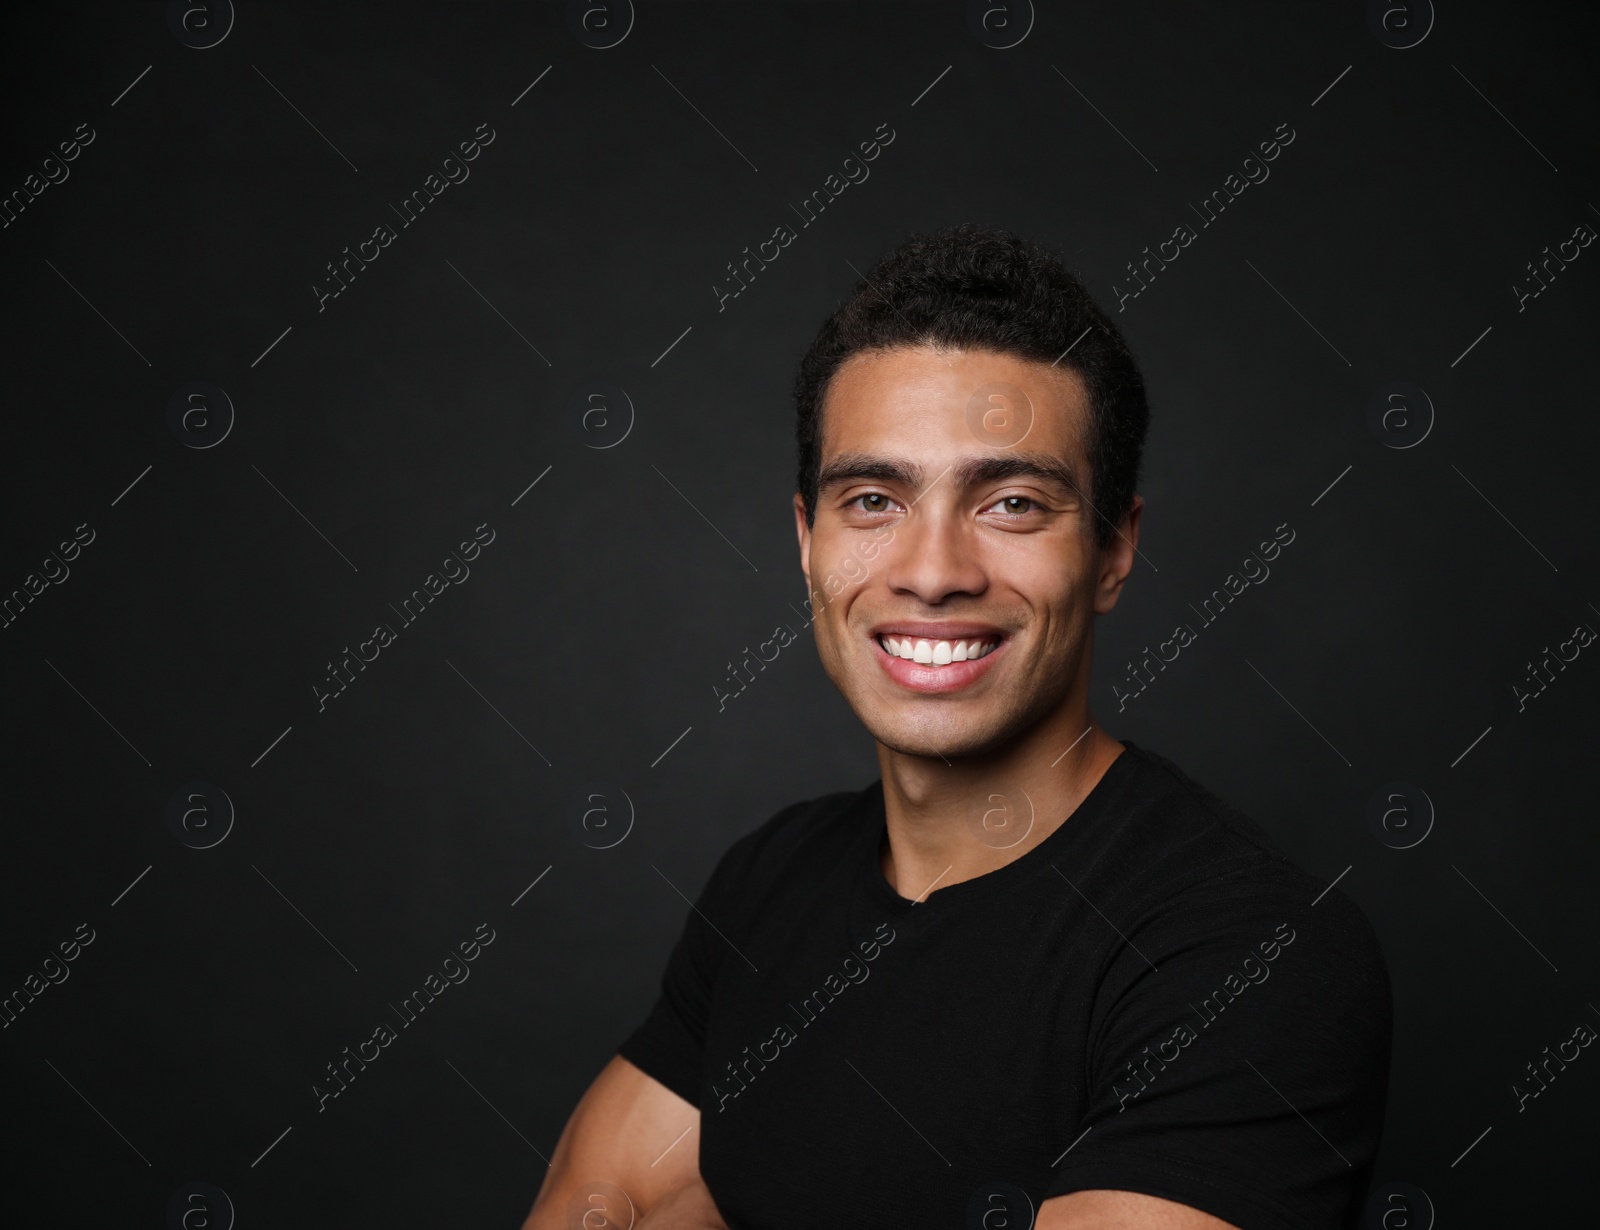 Photo of Handsome young African-American man on black background